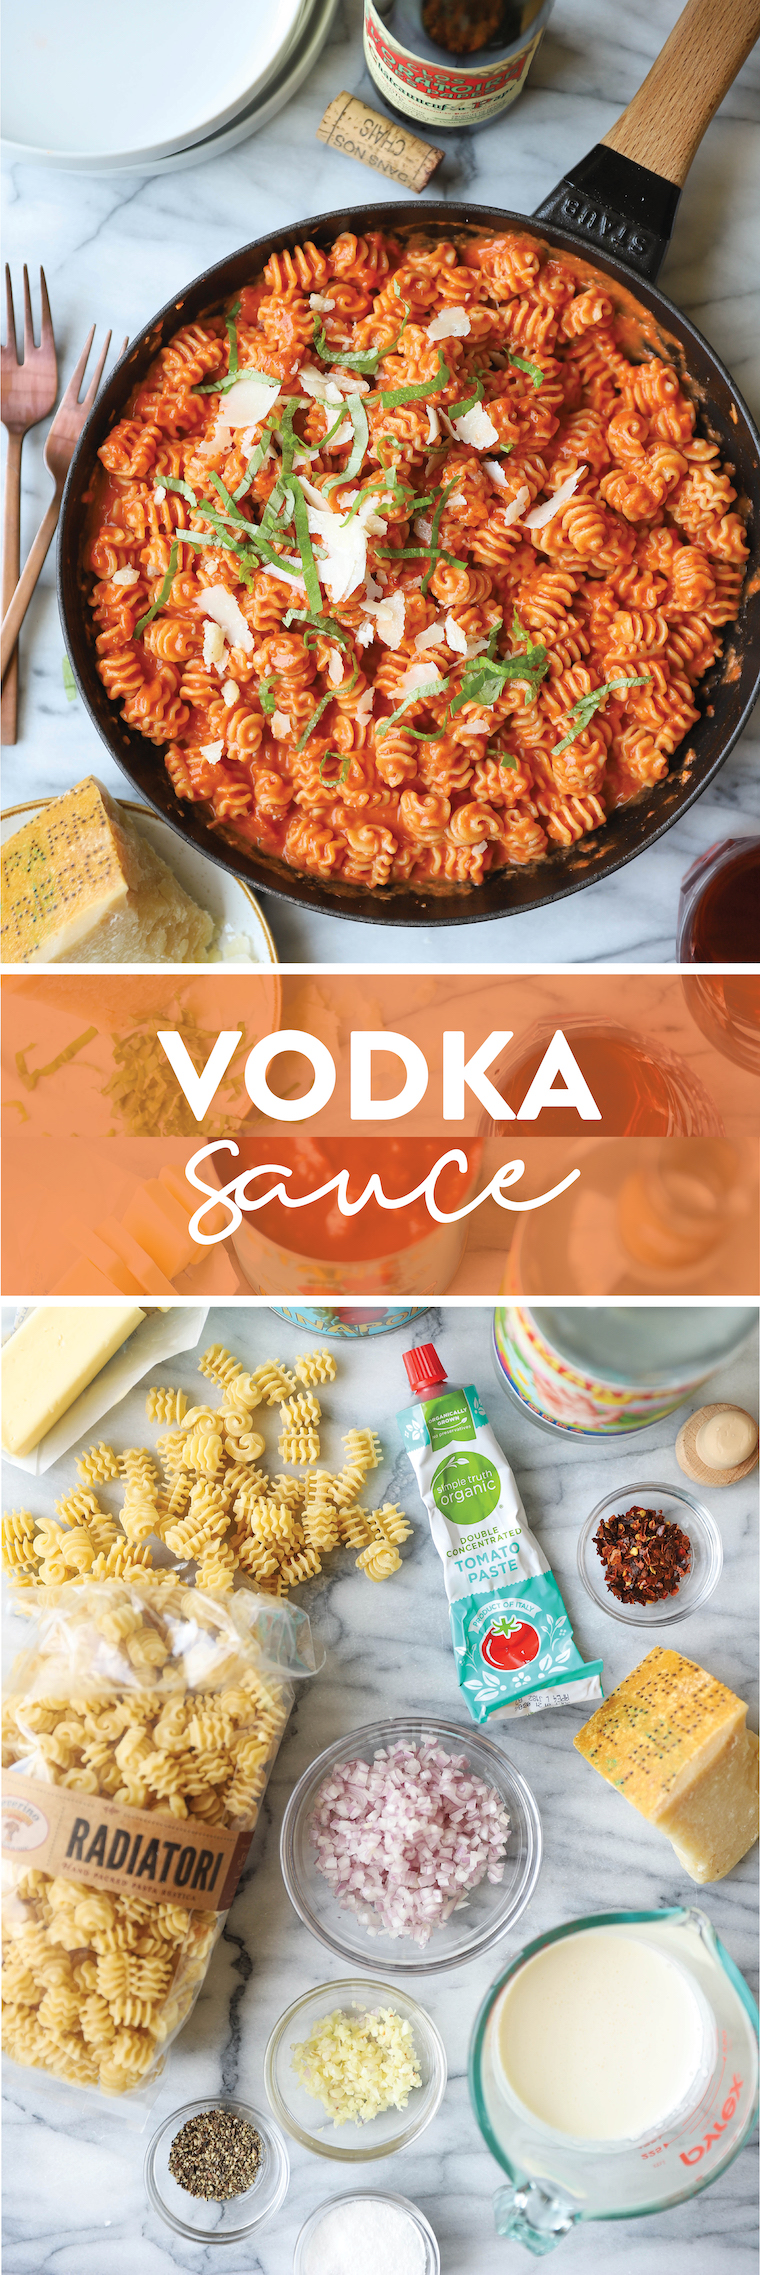 Vodka Sauce - Amazingly creamy, so bright, and super quick + easy. Comes together in 30 min! Serve with additional fresh Parmesan. SO SO GOOD.